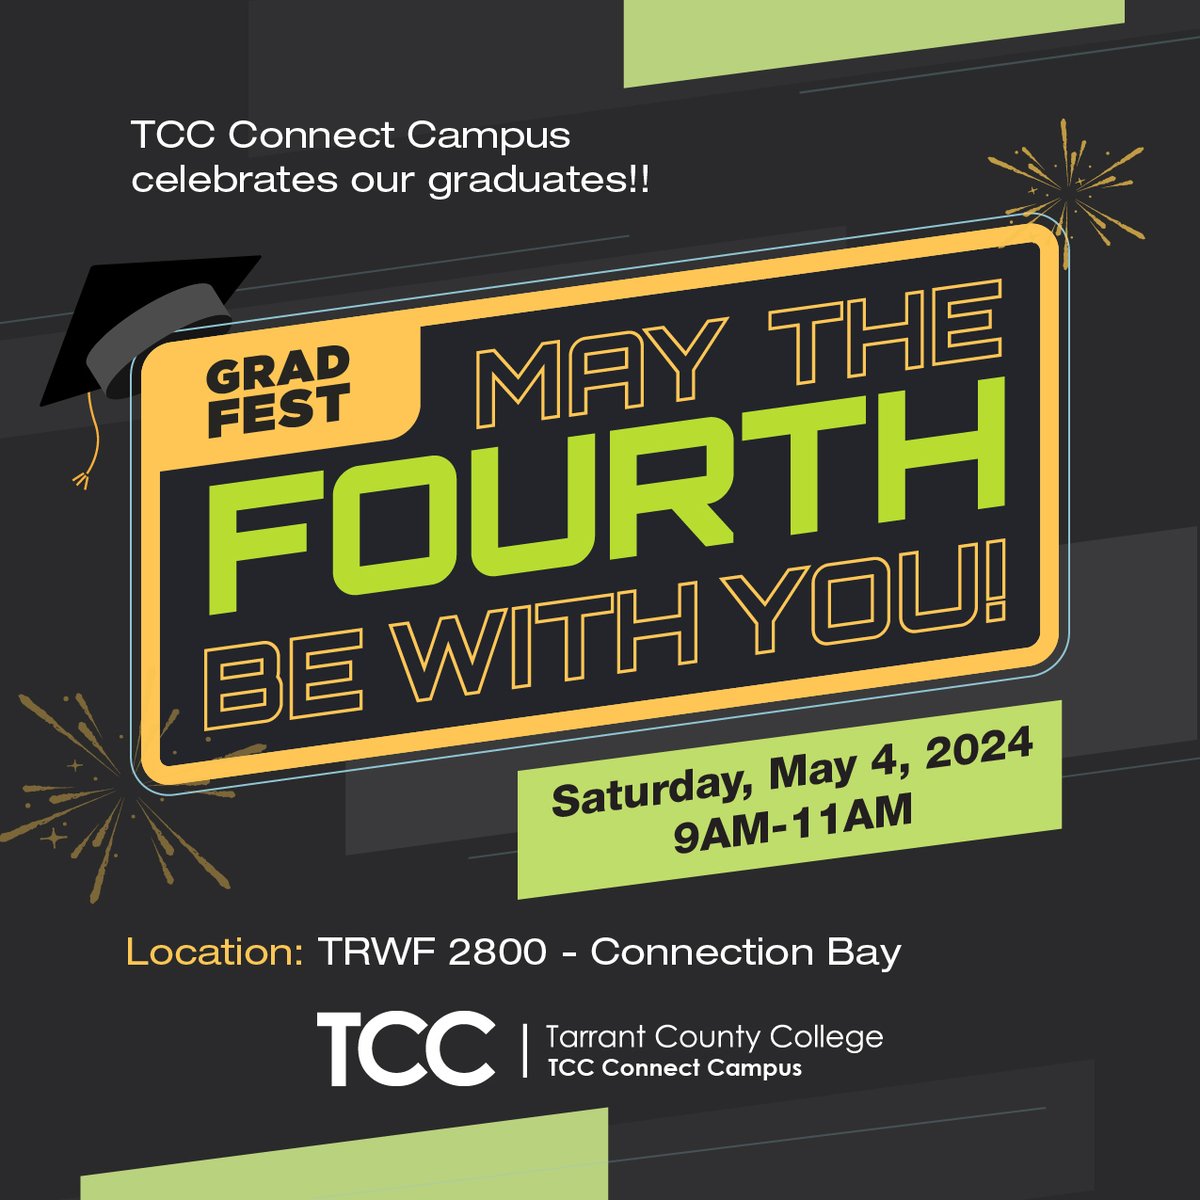 Join us this Saturday for the #TCCConnect Grad Fest! Bring your family and come celebrate your accomplishment! Join us for music, food, photo opportunities, and graduate swag.